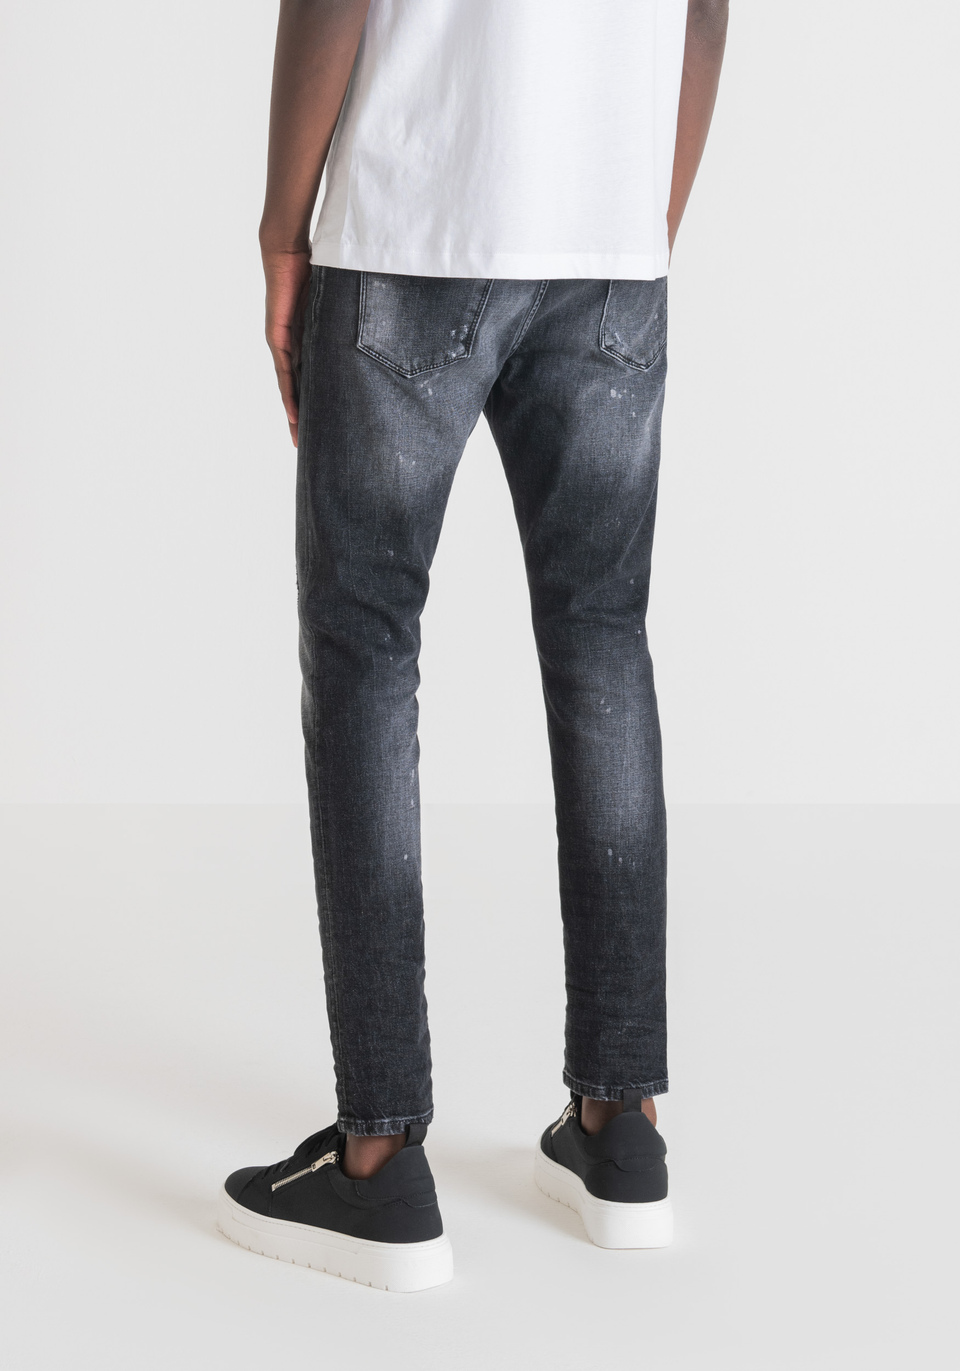 JEANS CARROT FIT „KENNY“ AUS RECYCELTEM MATERIAL - Antony Morato Online Shop